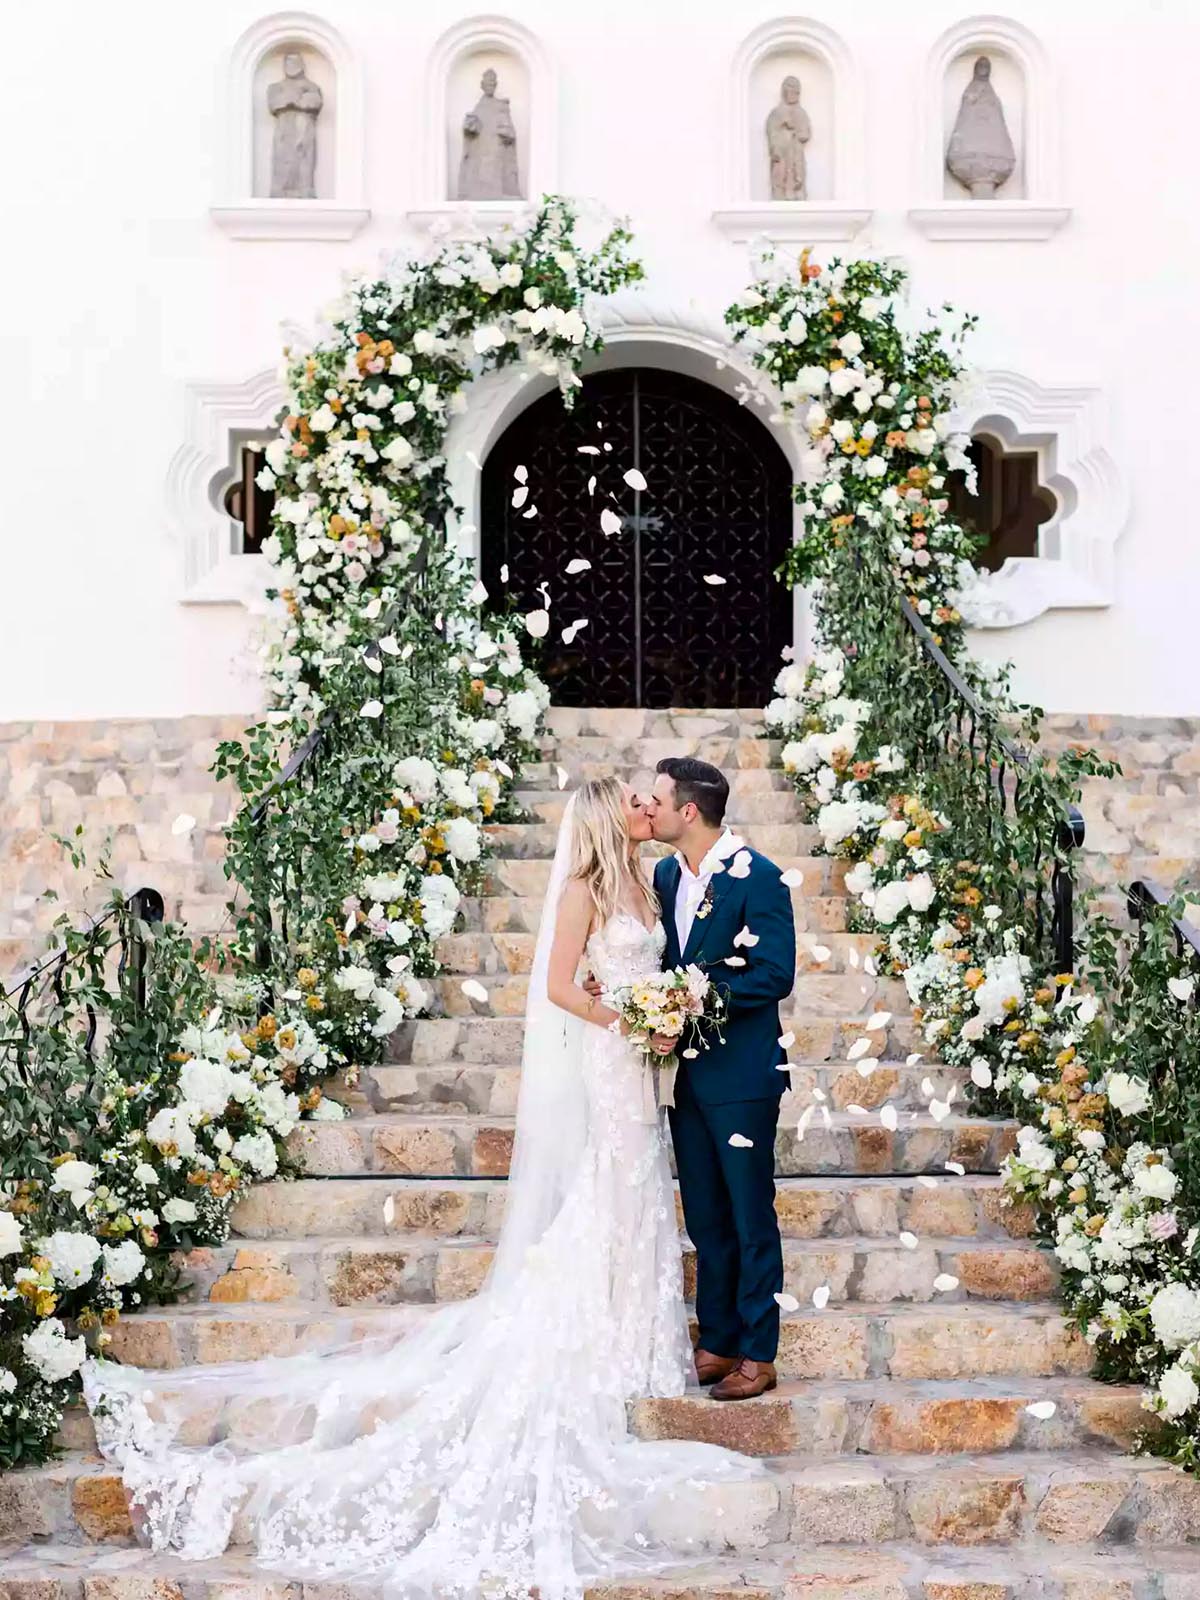 Wedding arch steps by Valorie Darling on Thursd